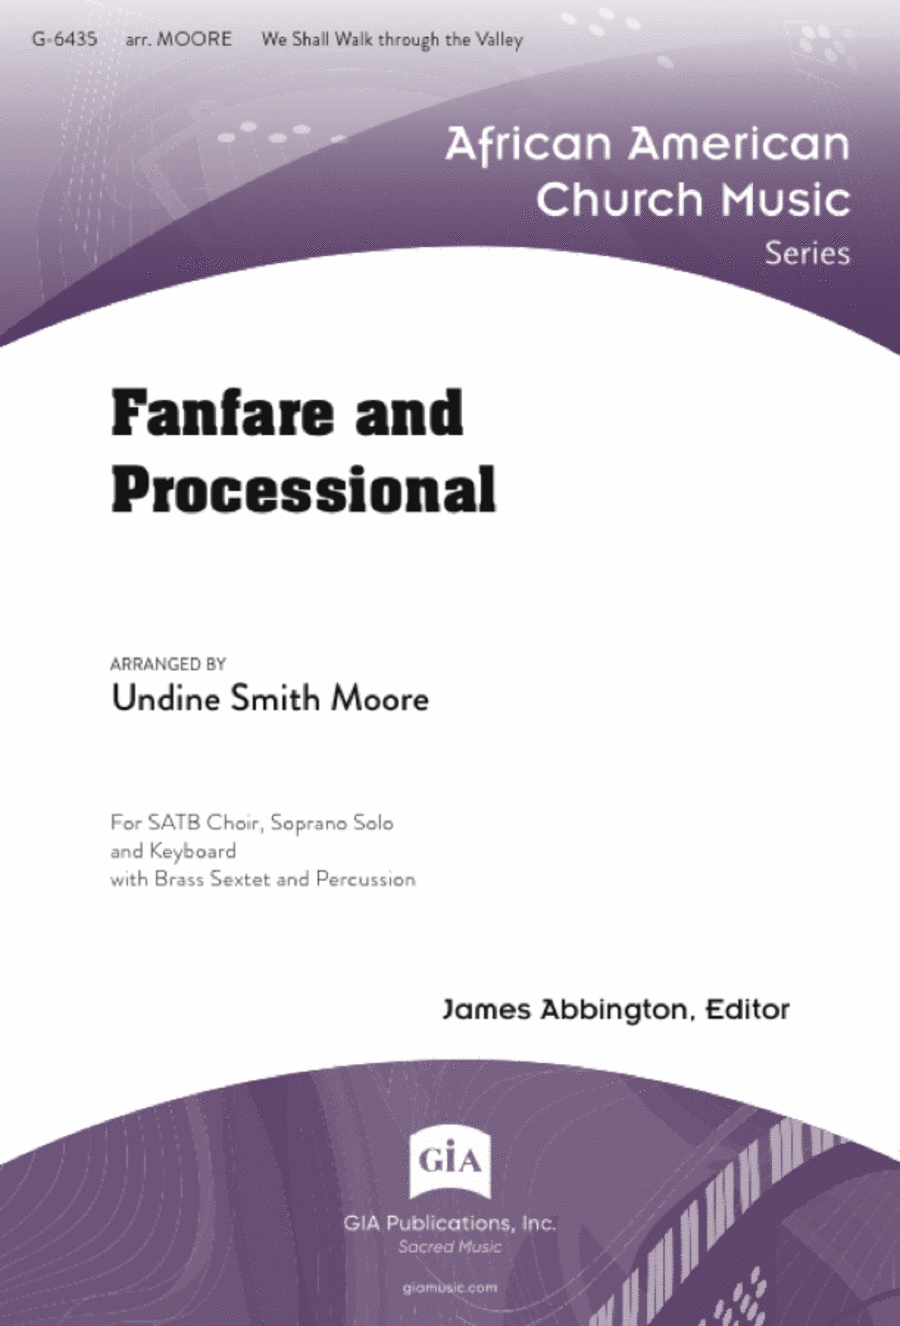 Fanfare and Processional -Instrument Parts